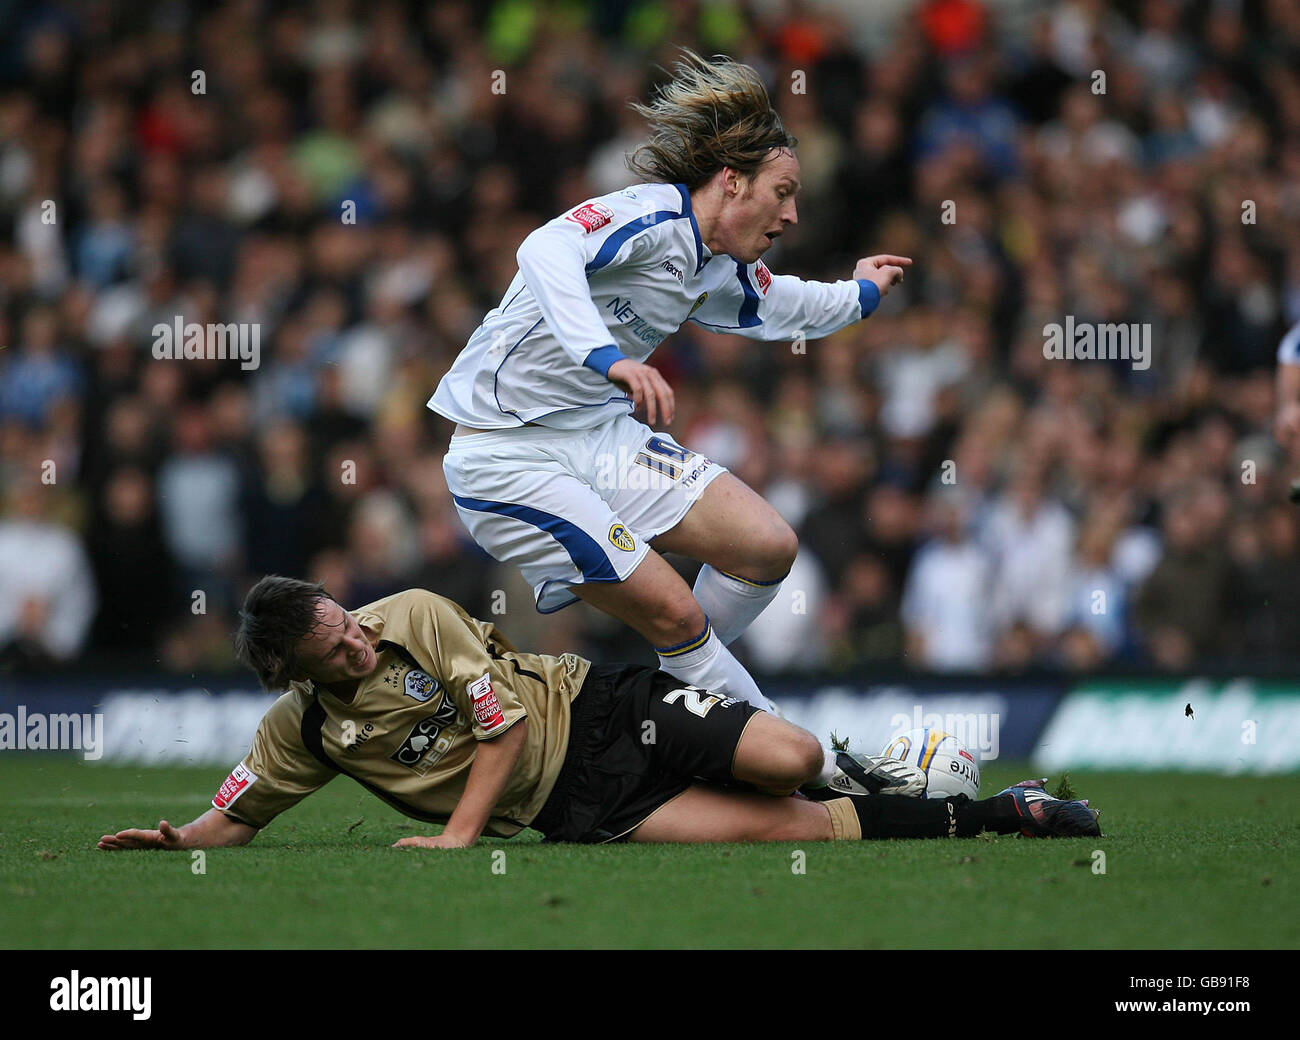 Leeds United's Luciano Becchio and Huddersfield Town's James Berrett (left) during the Coca-Cola Football League One match at Elland Road, Leeds. Stock Photo